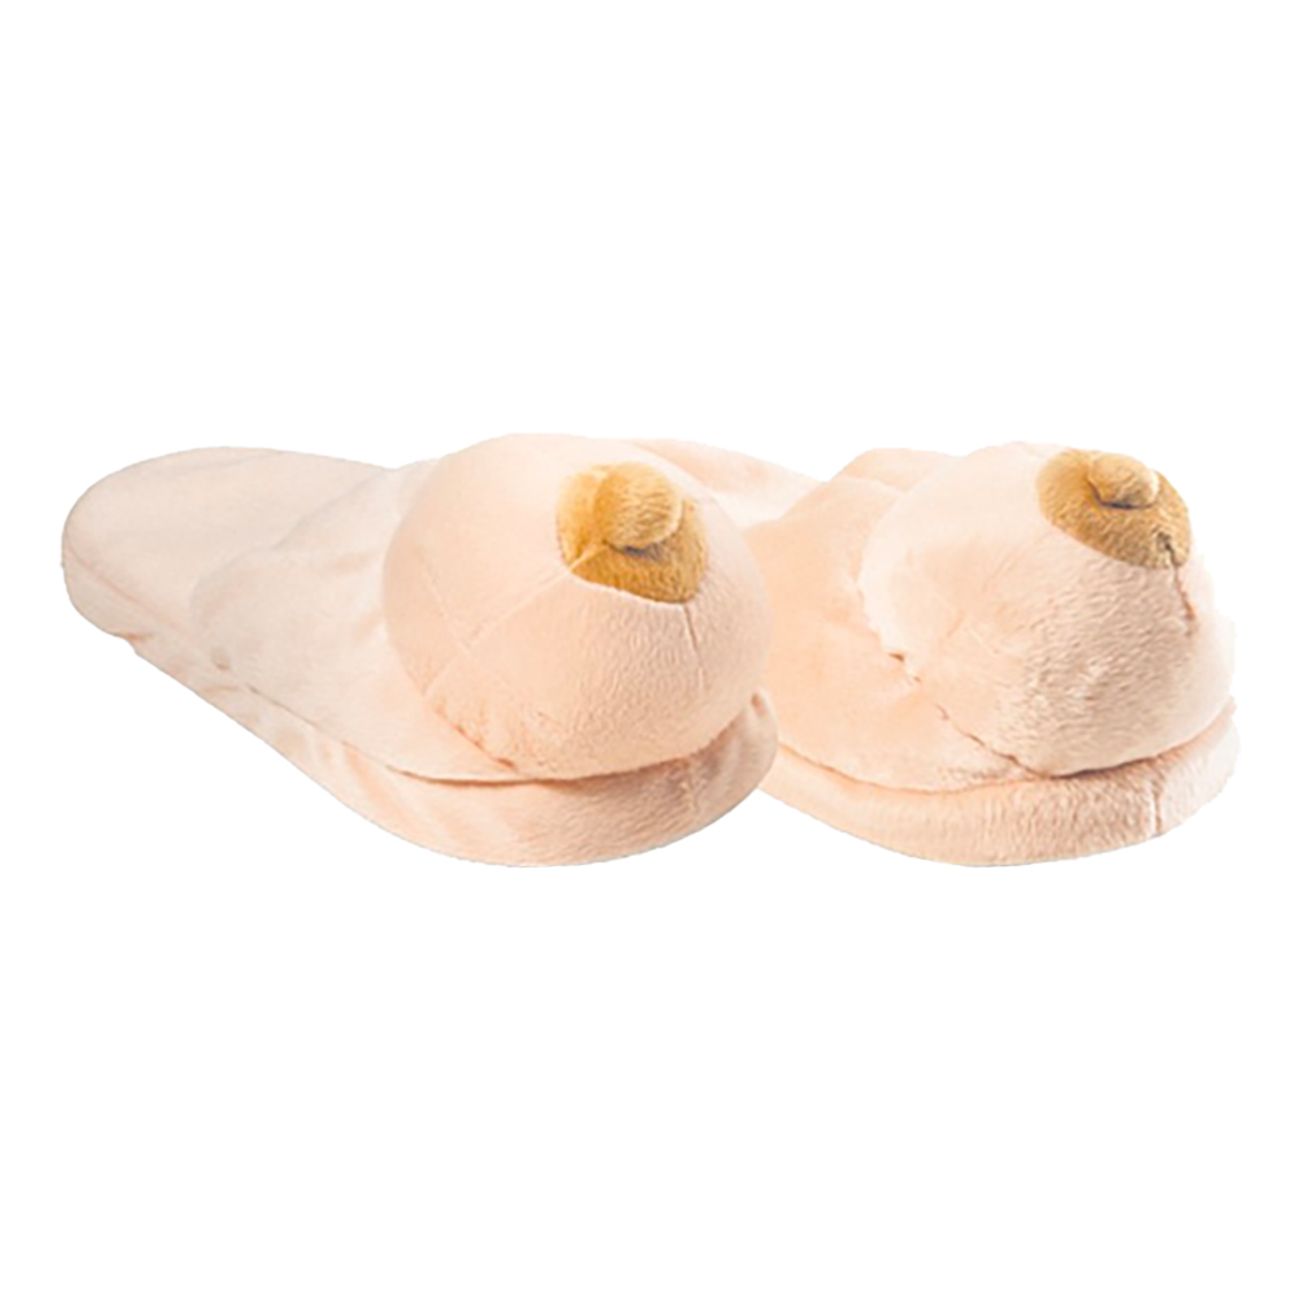 breast-slippers-91842-1